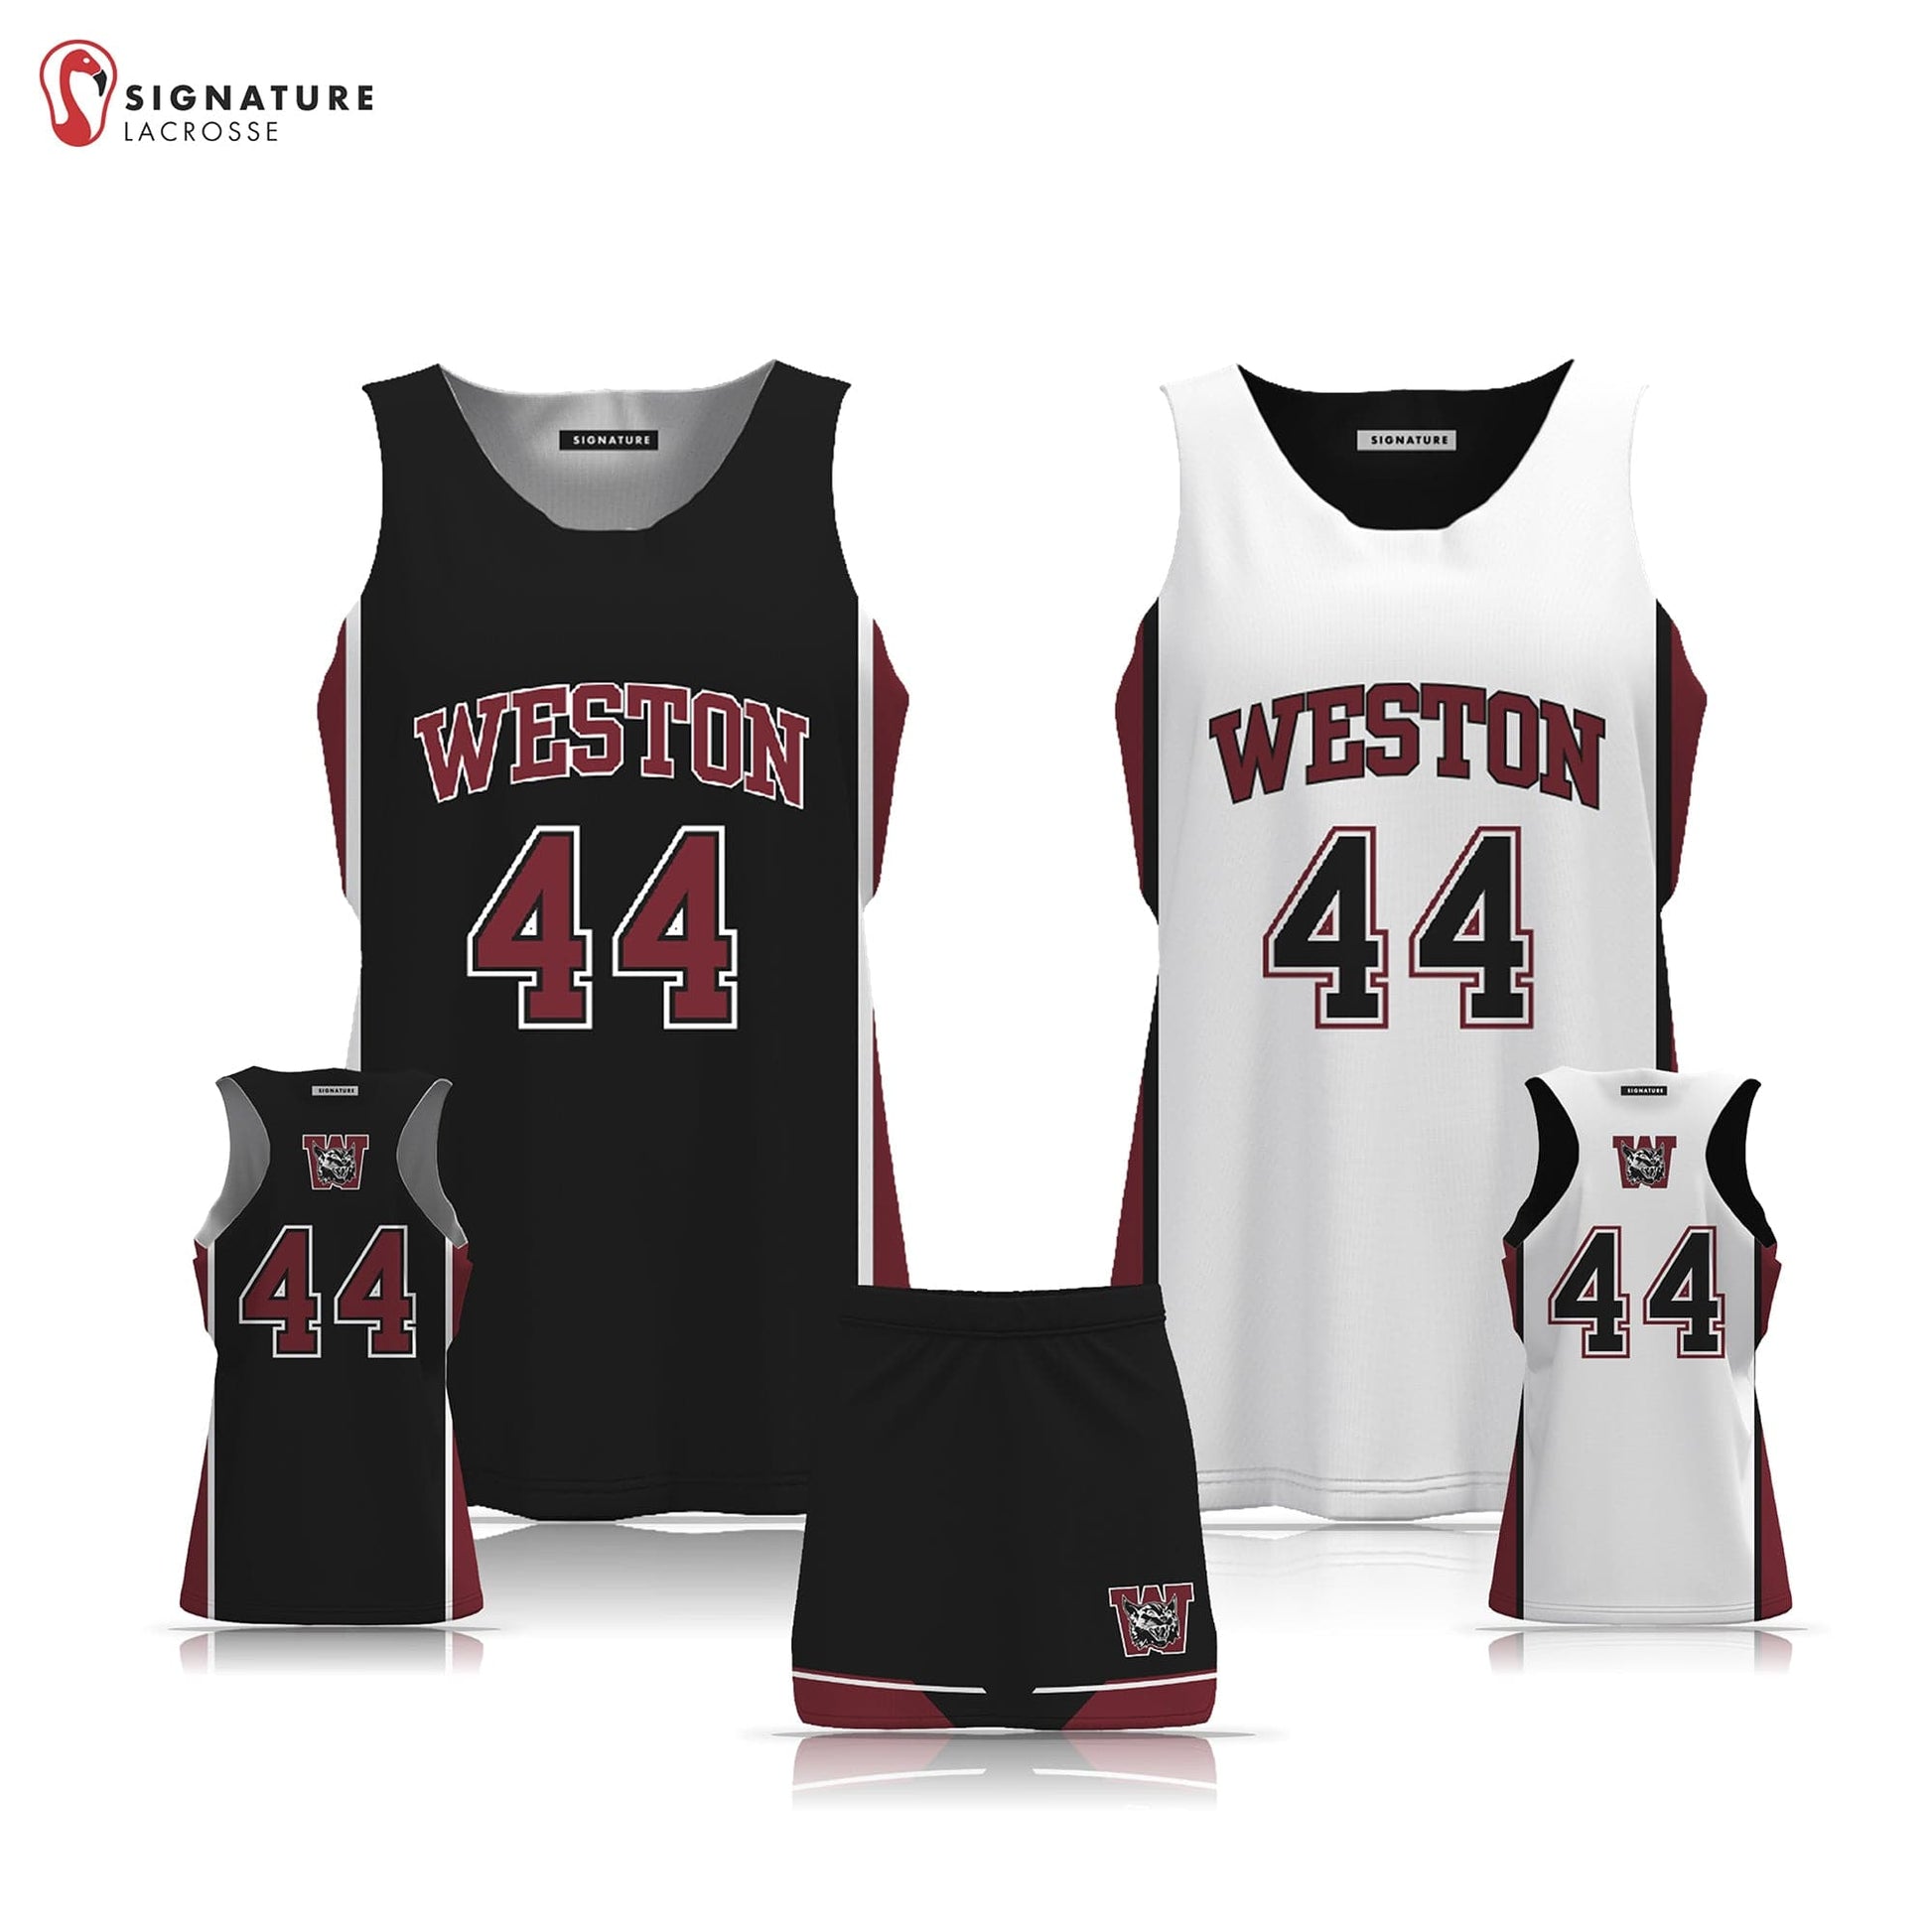 Weston Youth Lacrosse Women's 2 Piece Player Game Package: Grade 7-8 Signature Lacrosse